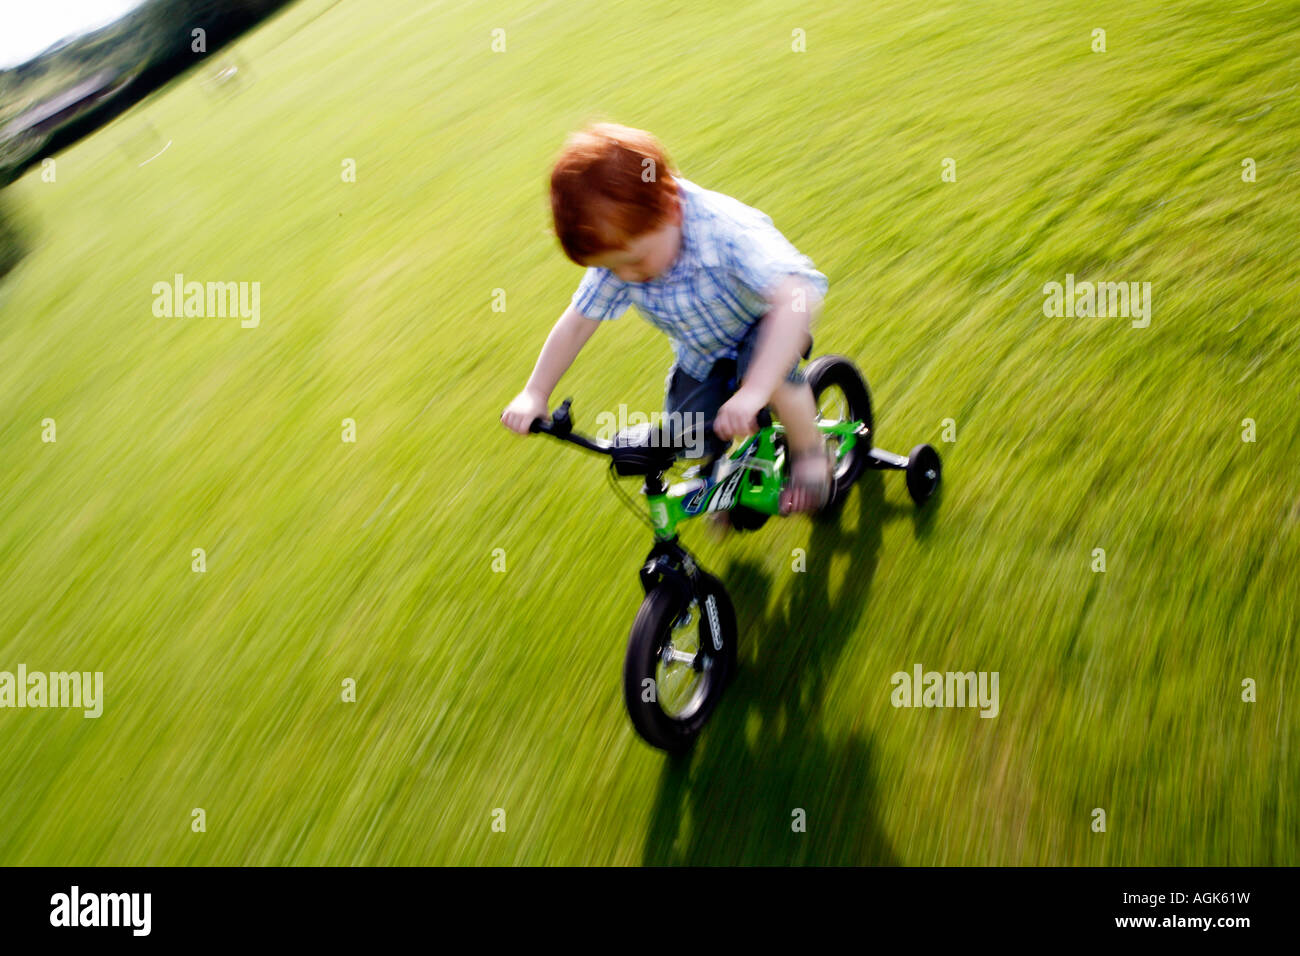 Boy cycling on a bike with stabilisers Stock Photo